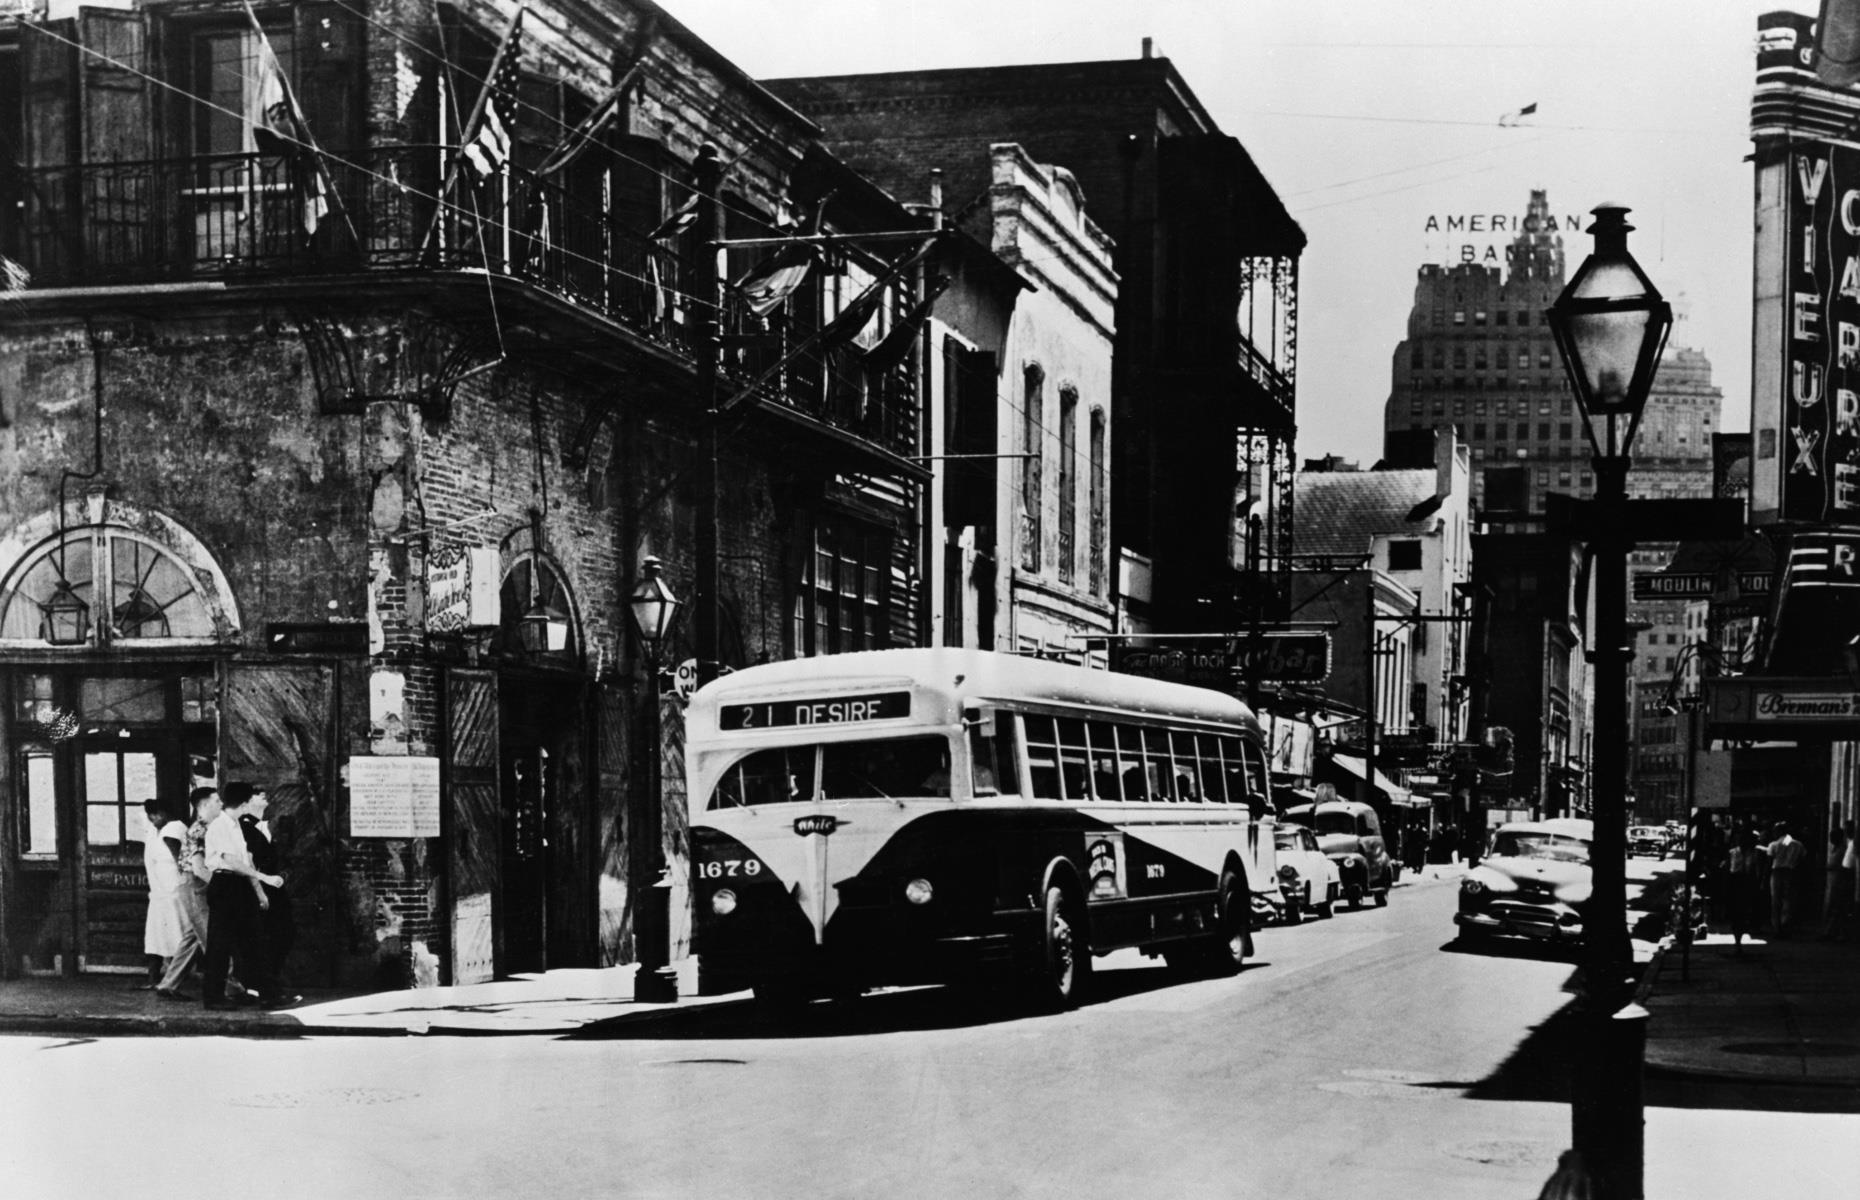 <p>One of America’s oldest and most famous social spots, plans were laid for Bourbon Street in the heart of New Orleans’ French Quarter in 1721 by engineer Adrien de Pauger, who named it after the ruling French royal family at the time. The landmark Old Absinthe House (pictured on the left) was constructed in around 1806, shown here in 1953 alongside a streetcar named Desire, before the ever-popular street was transformed into the neon-lined hub we know today. </p>